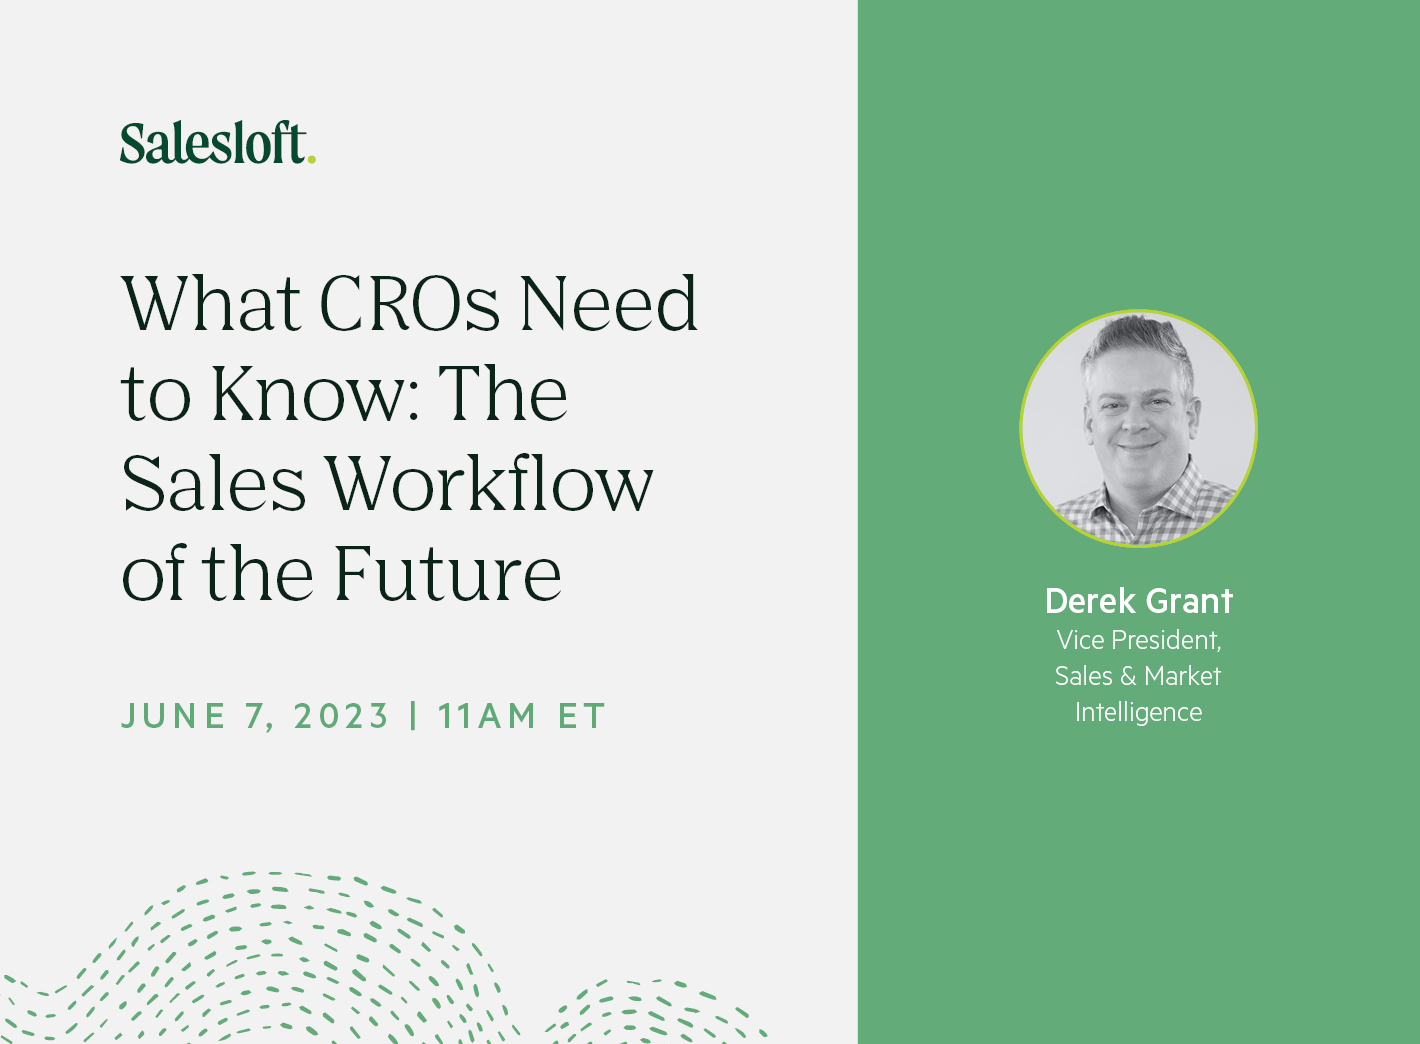 What CROs Need to Know: The Sales Workflow of the Future